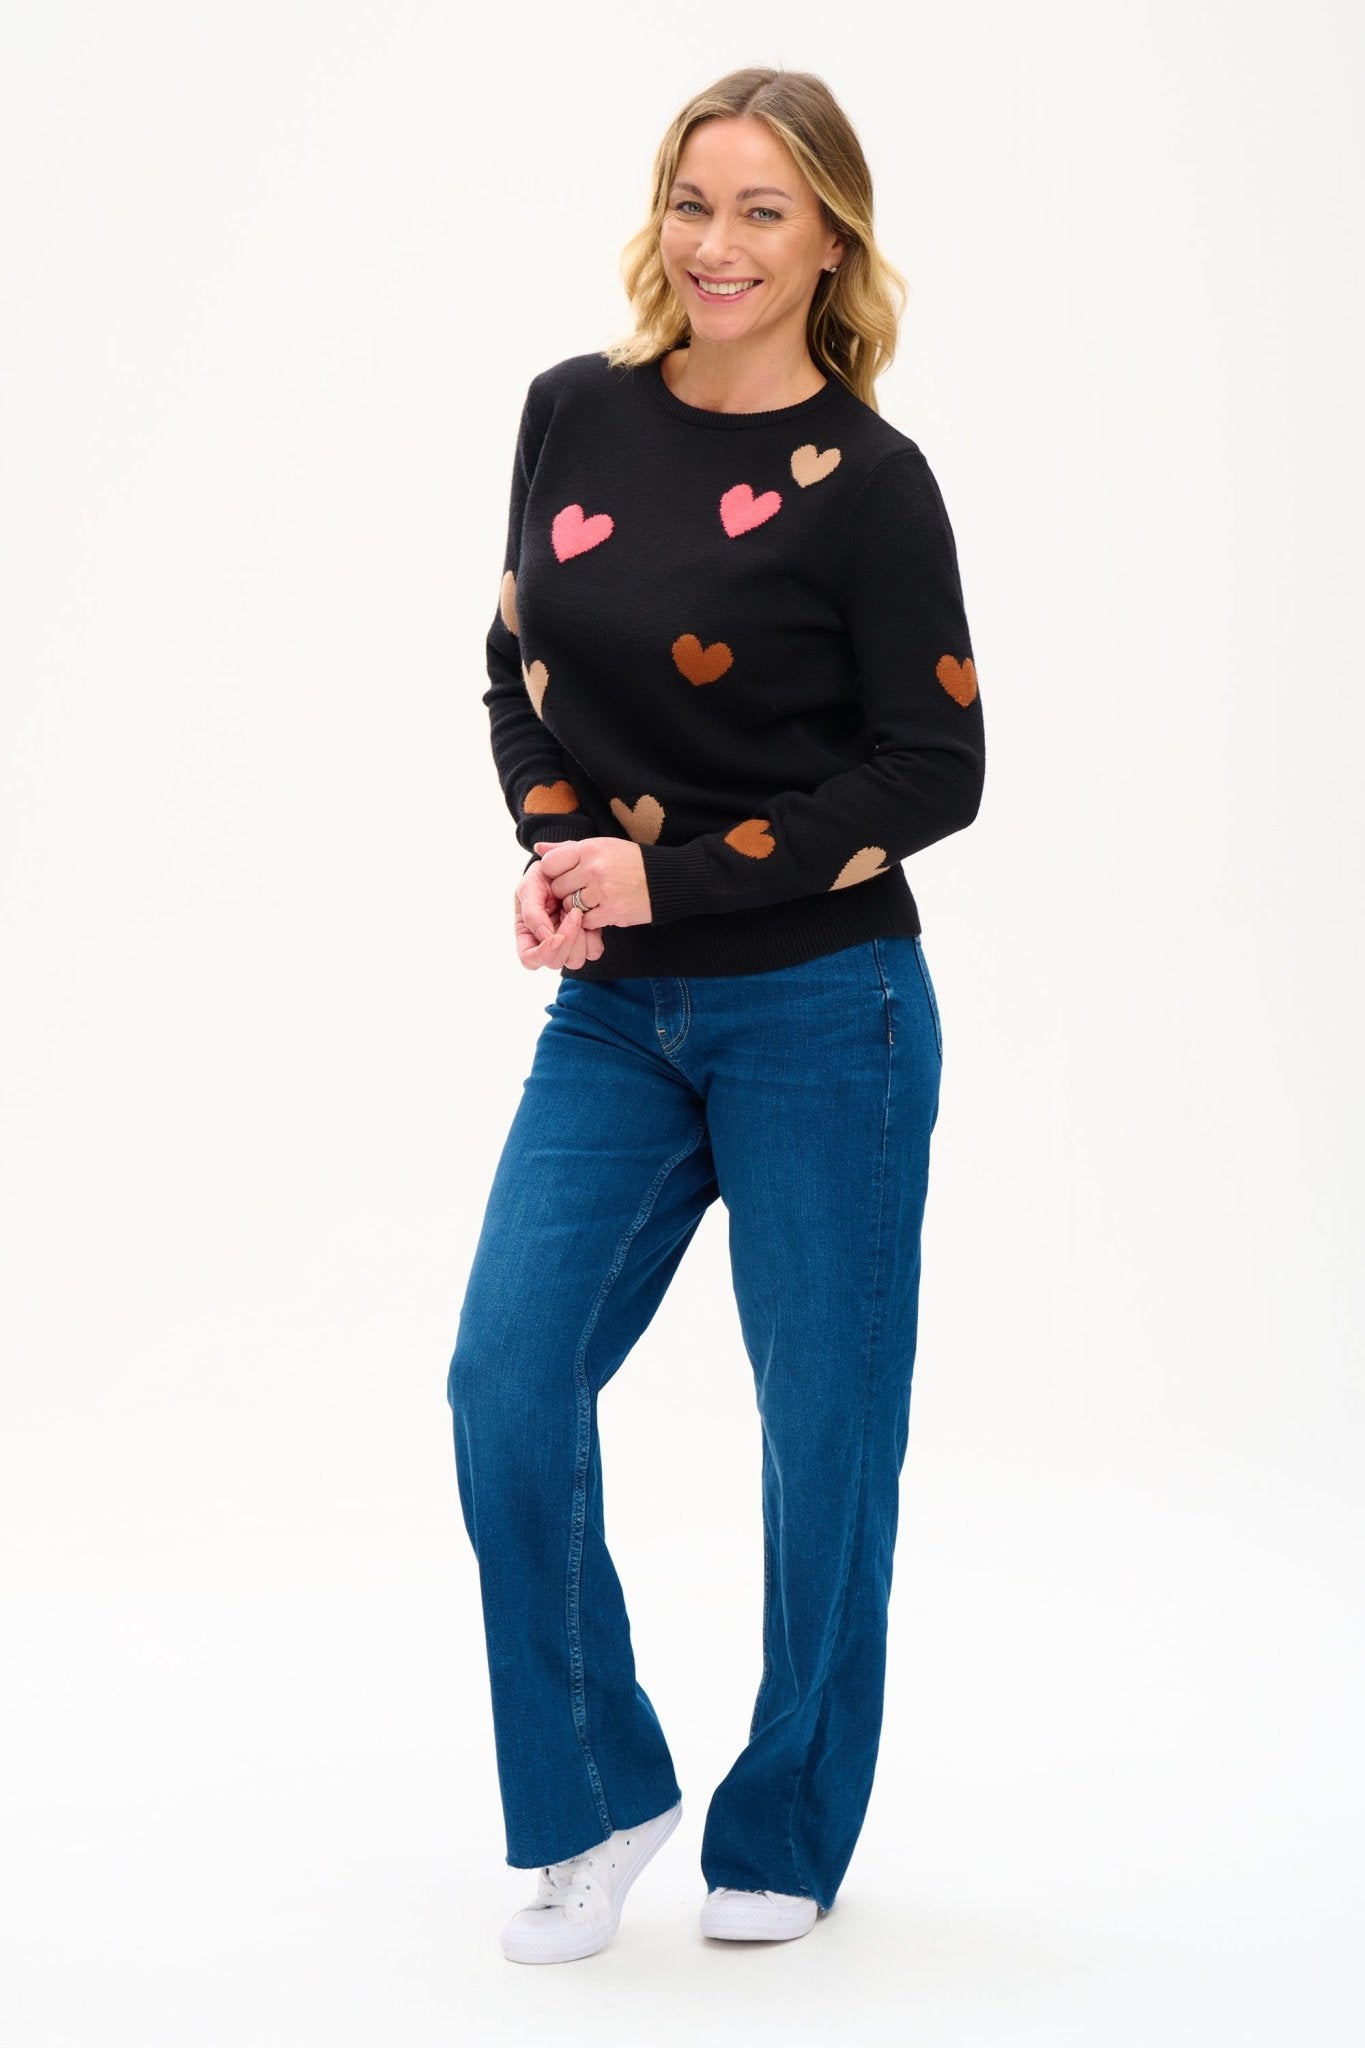 Stacey Jumper - Scattered Hearts - Rockamilly-Knitwear-Vintage